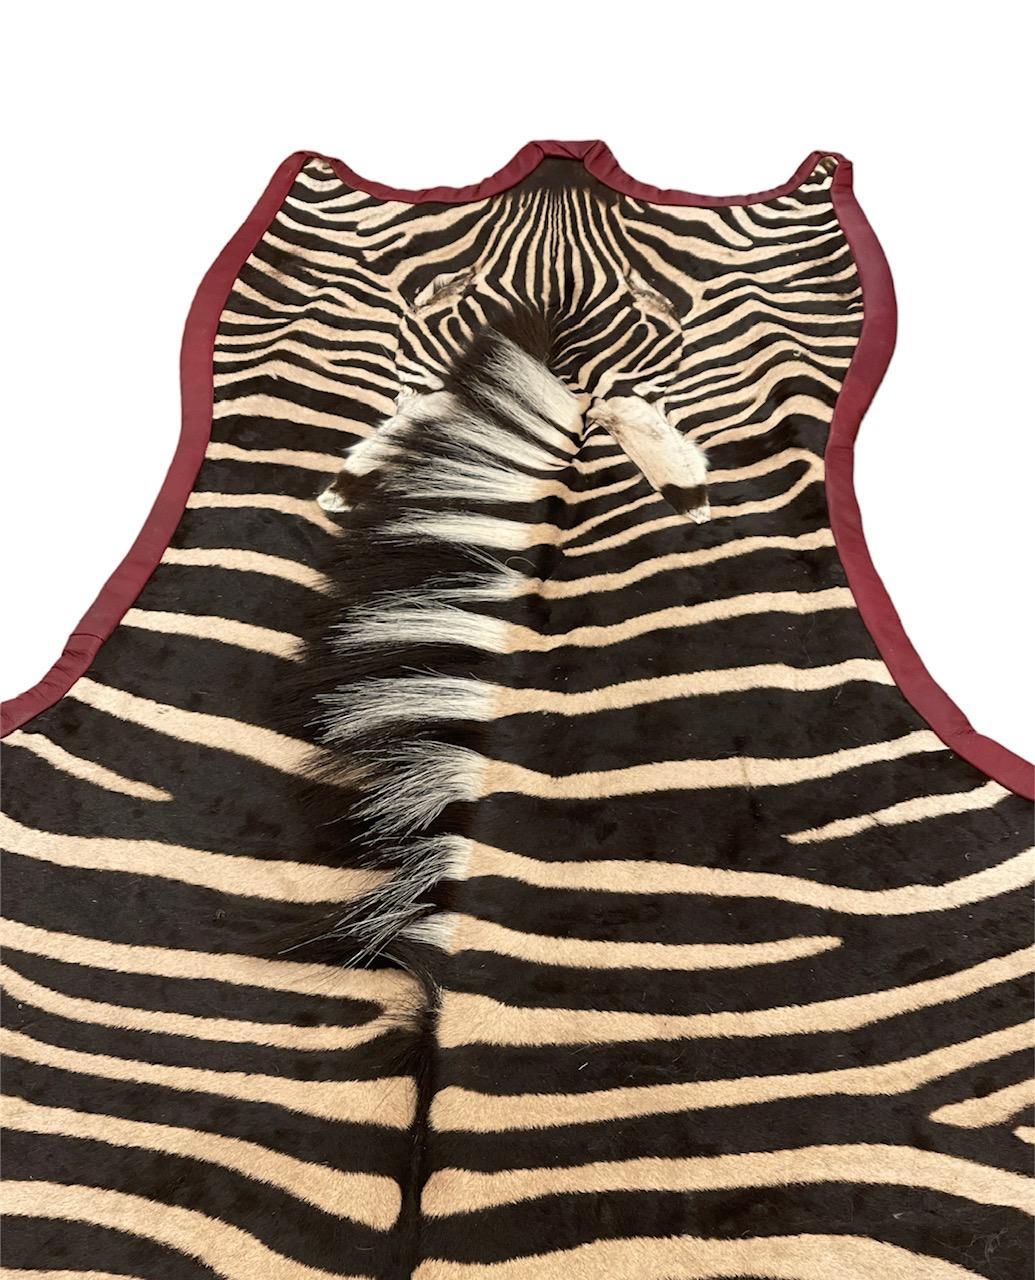 Gomez Zebra Hide Rug Trimmed in Burgundy Leather In New Condition For Sale In Saint Louis, US